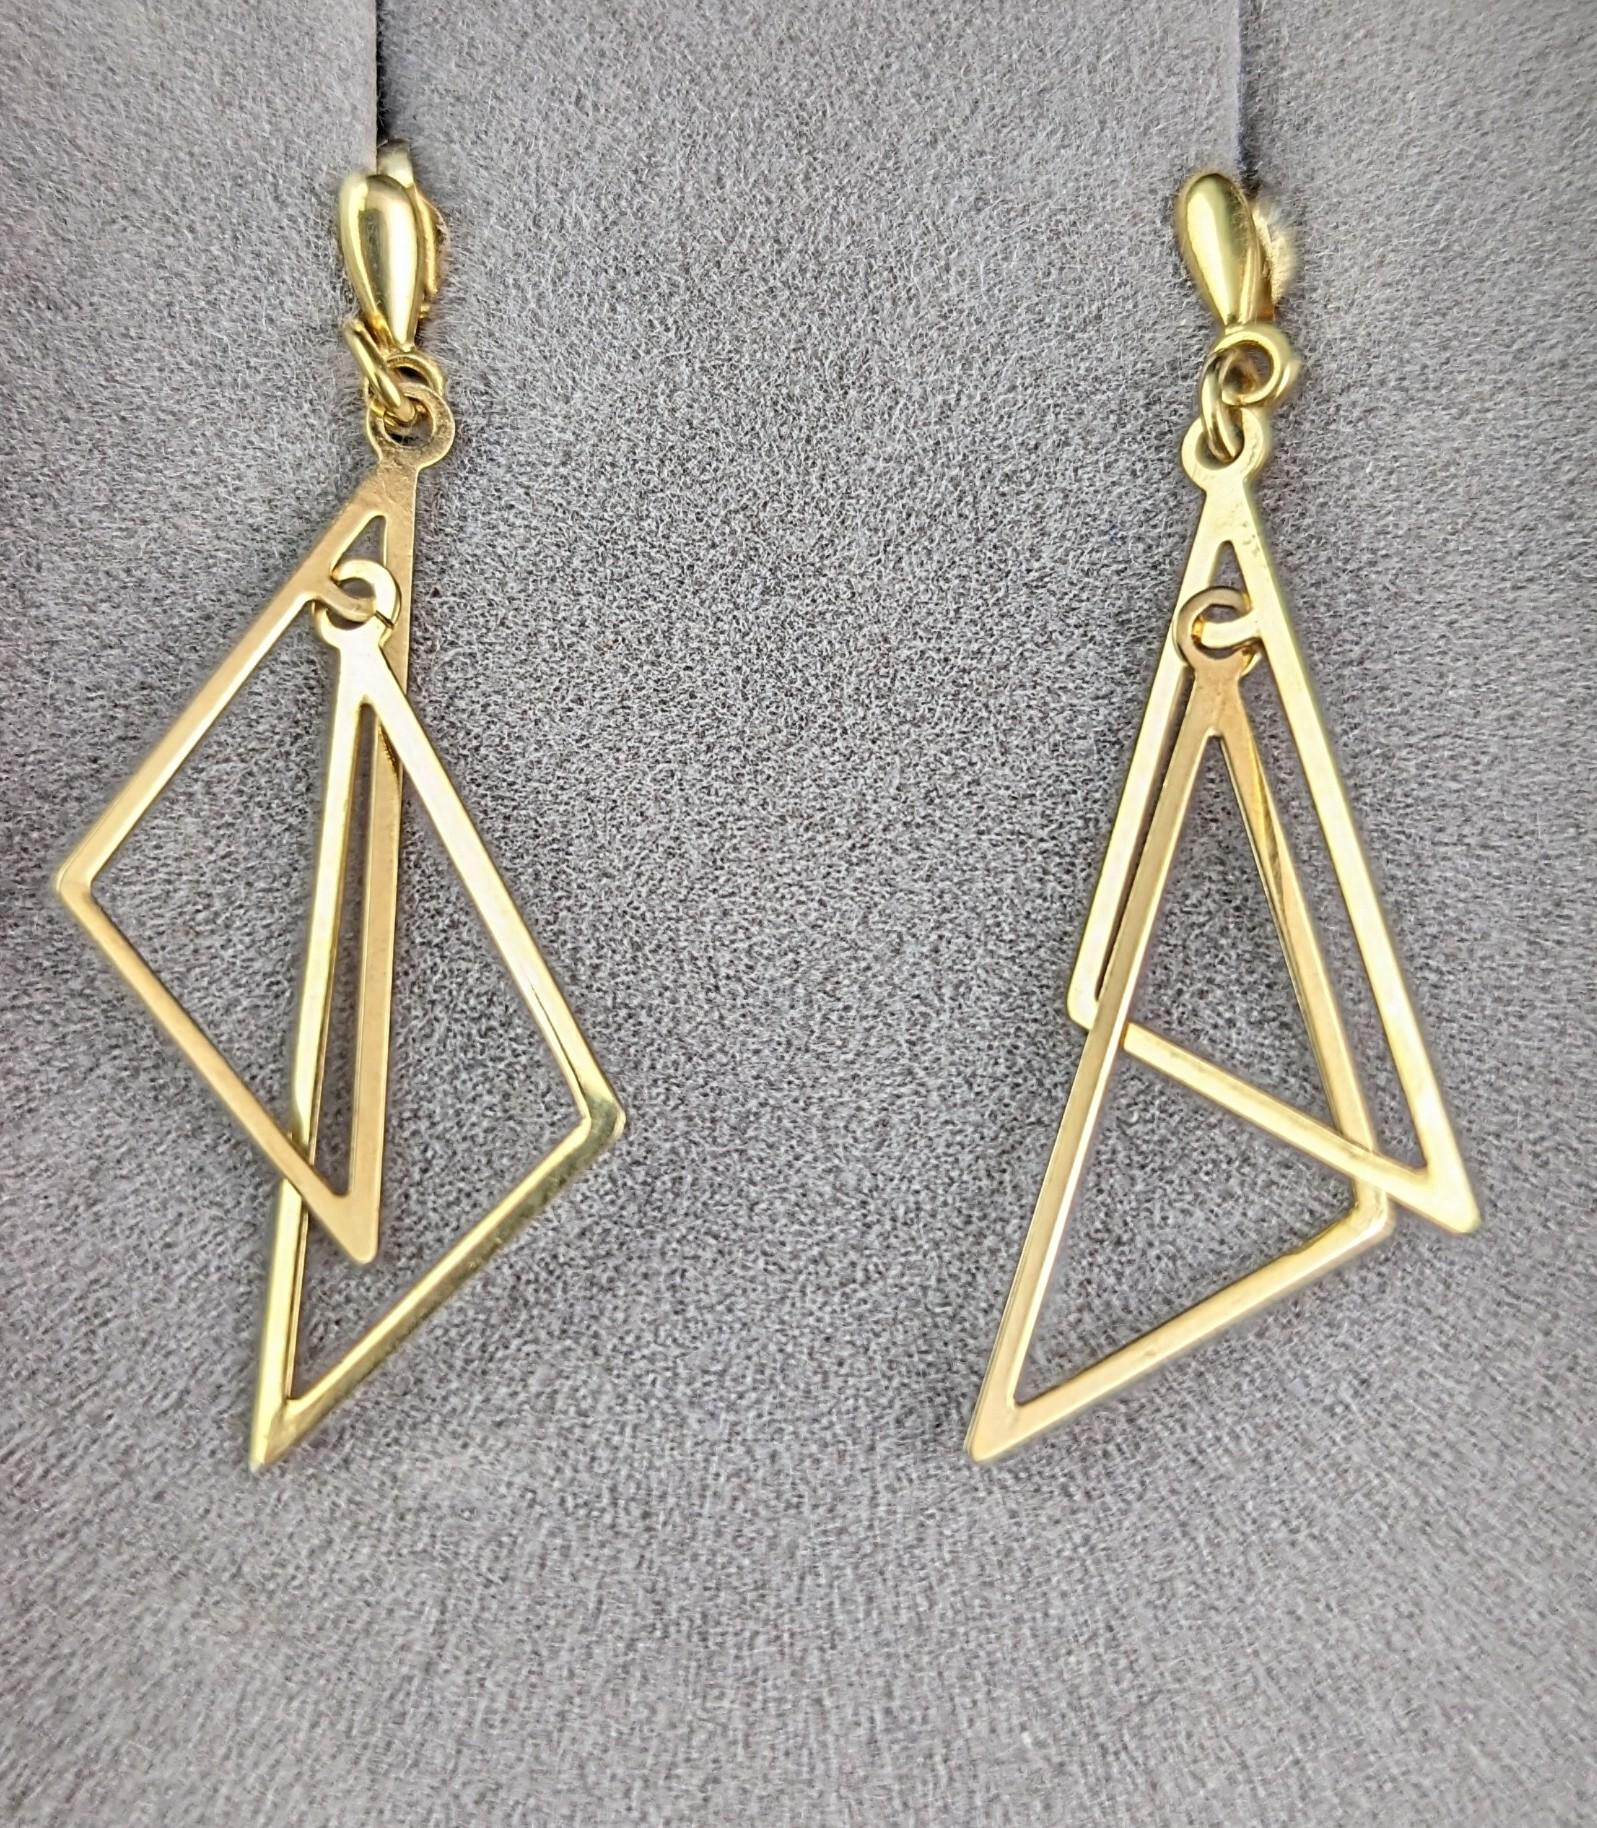 A gorgeous pair of vintage 9ct yellow gold earrings.

They are a modernist pair designed as two open work interlocking triangles which dangle down from the fitted stud style post.

They have the right amount of shimmer due to the clean sharp lines